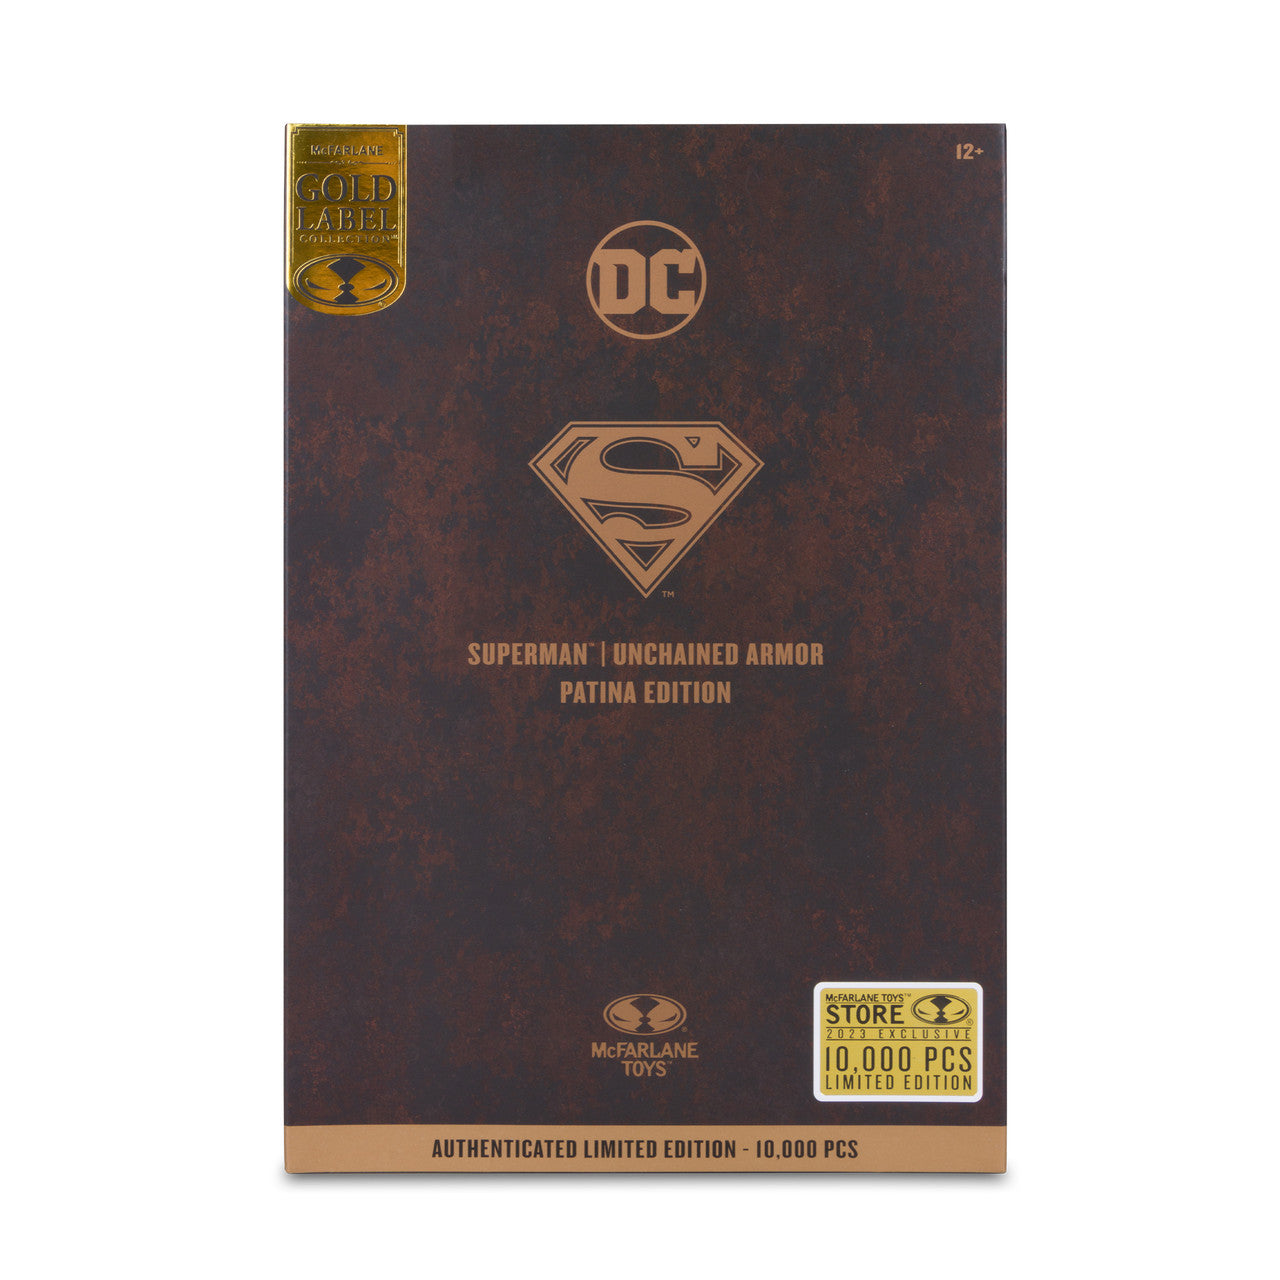 Superman (Unchained Armor) Patina Edition in package - Heretoserveyou